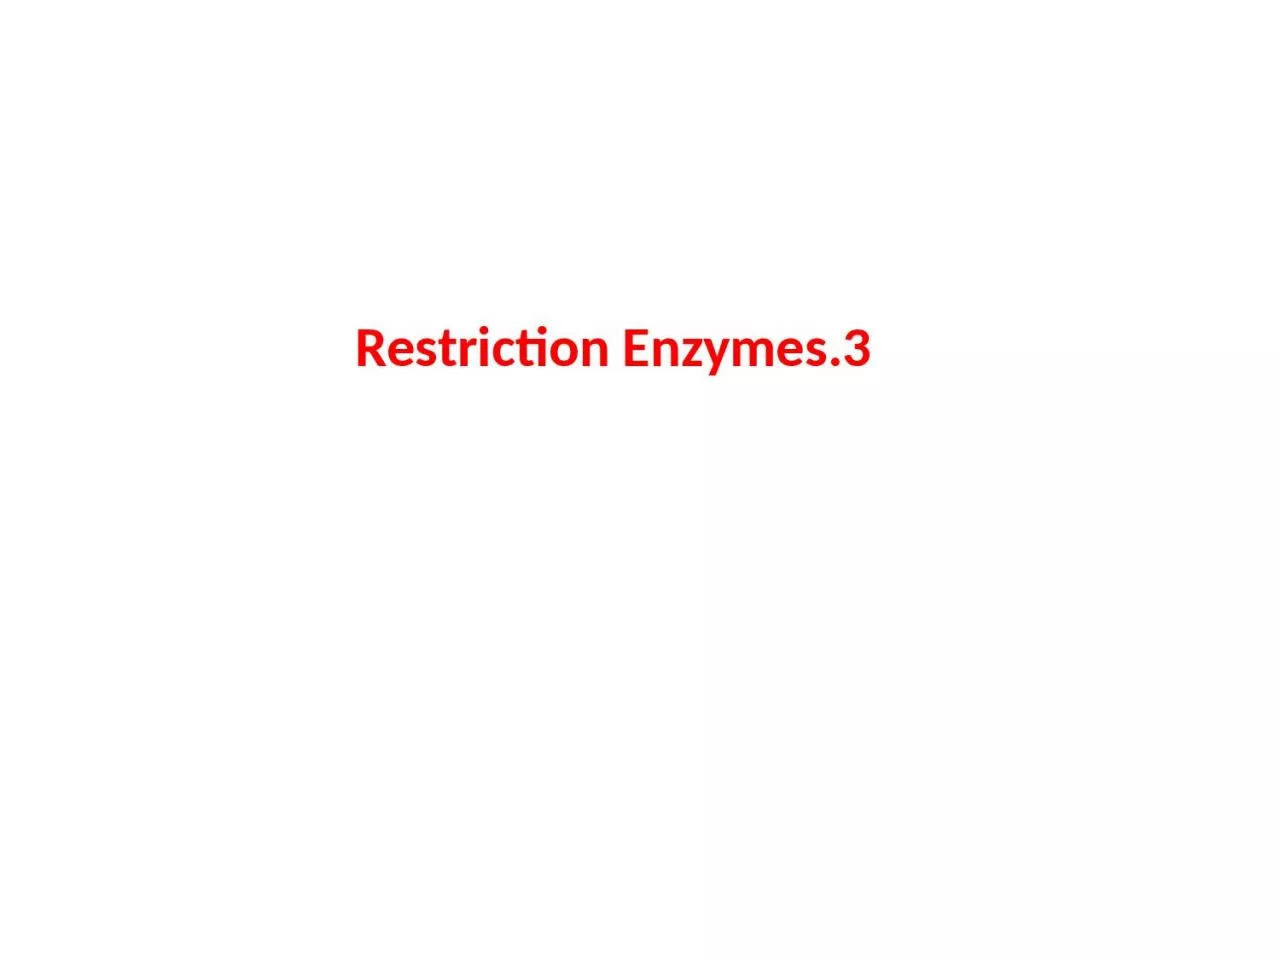 Restriction  Enzymes.3 The biochemistry of restriction advanced with